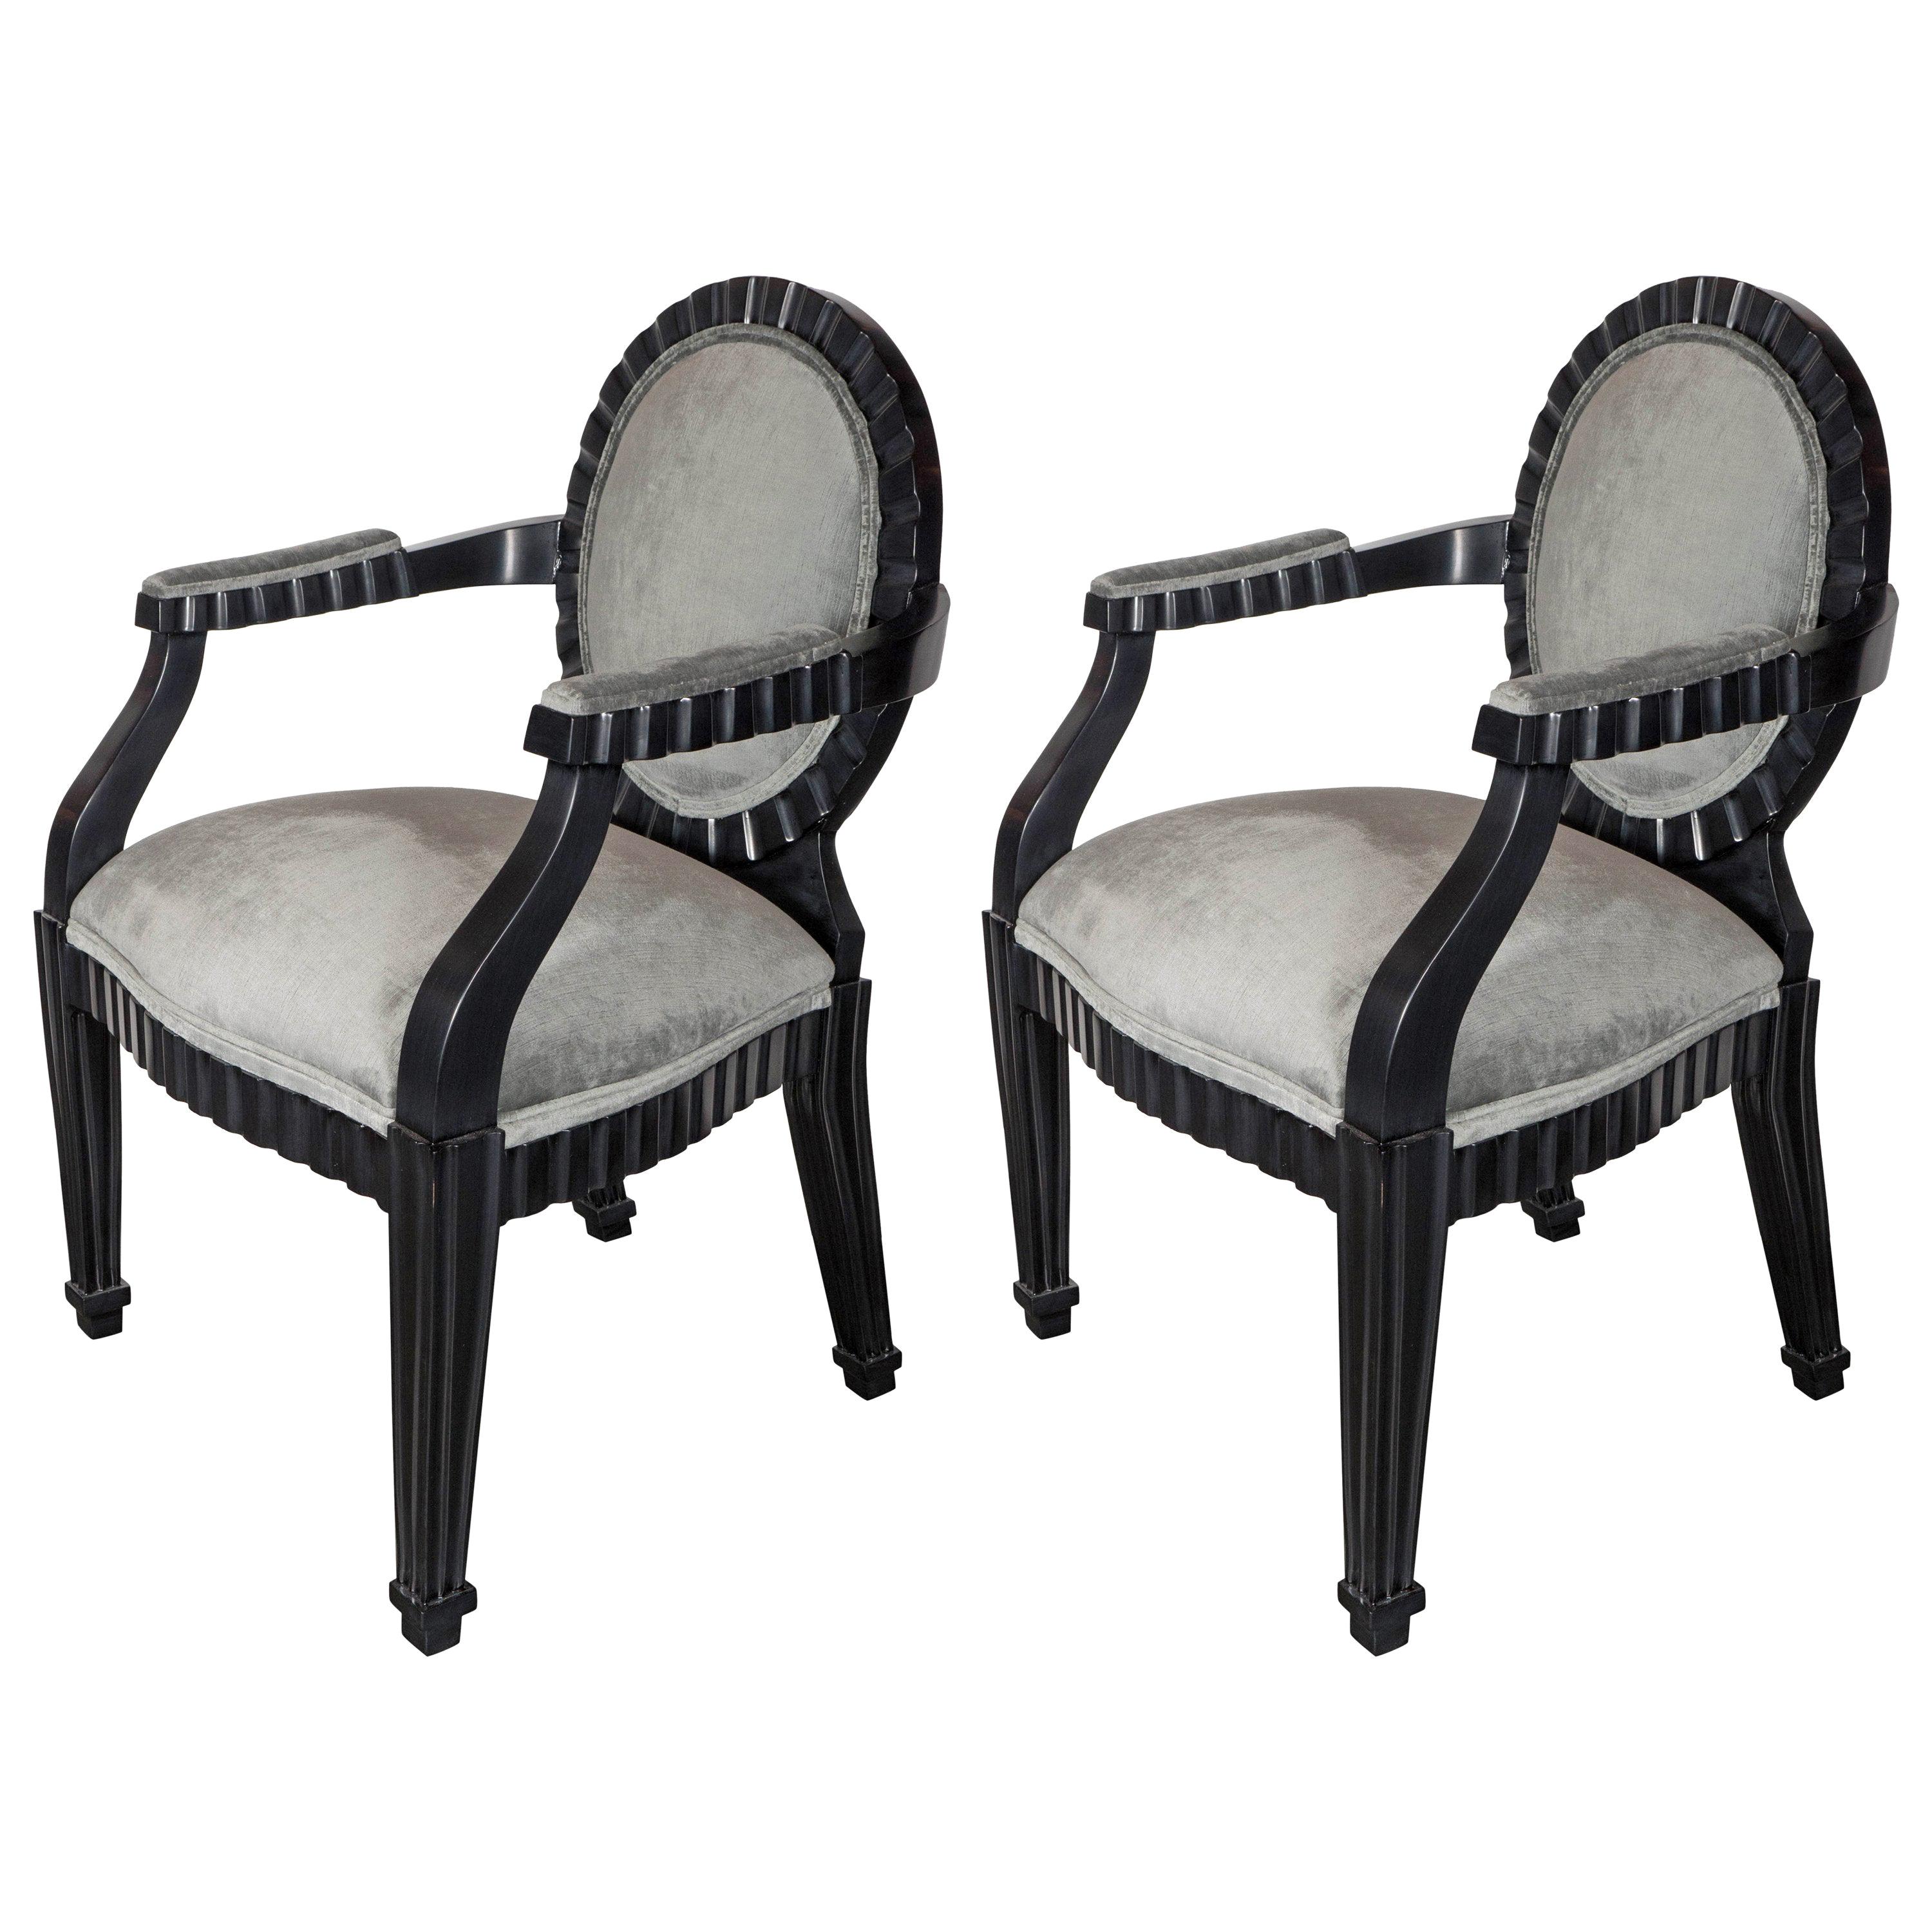 Pair of Modernist Chairs by Donghia in Ebonized Walnut & Smoked Platinum Velvet